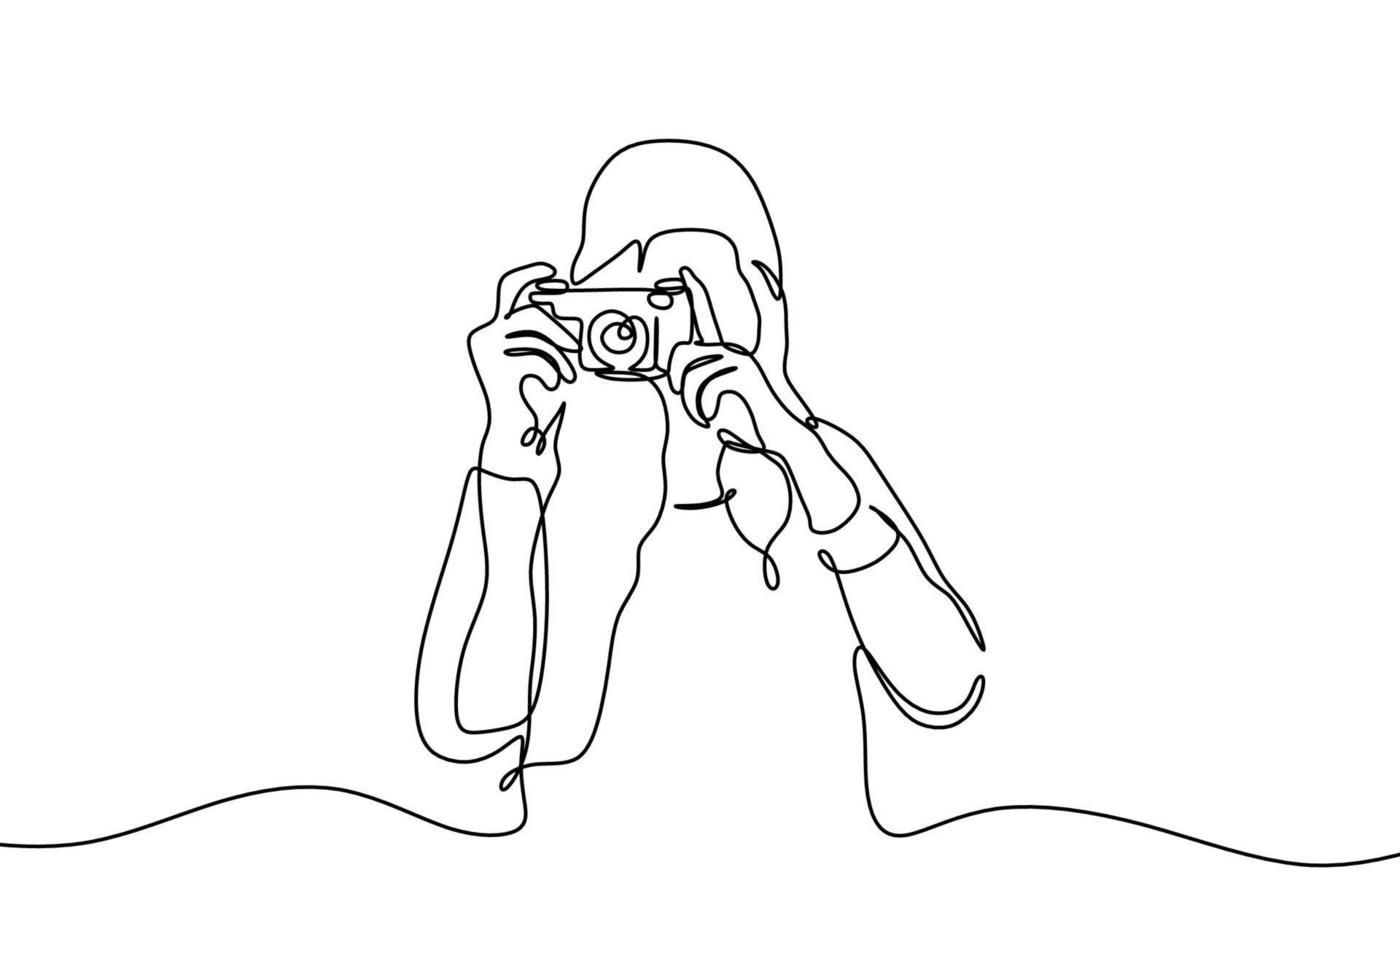 Continuous one line drawing of girl taking picture with her camera. Photographer concept. Young lady vector illustration simplicity